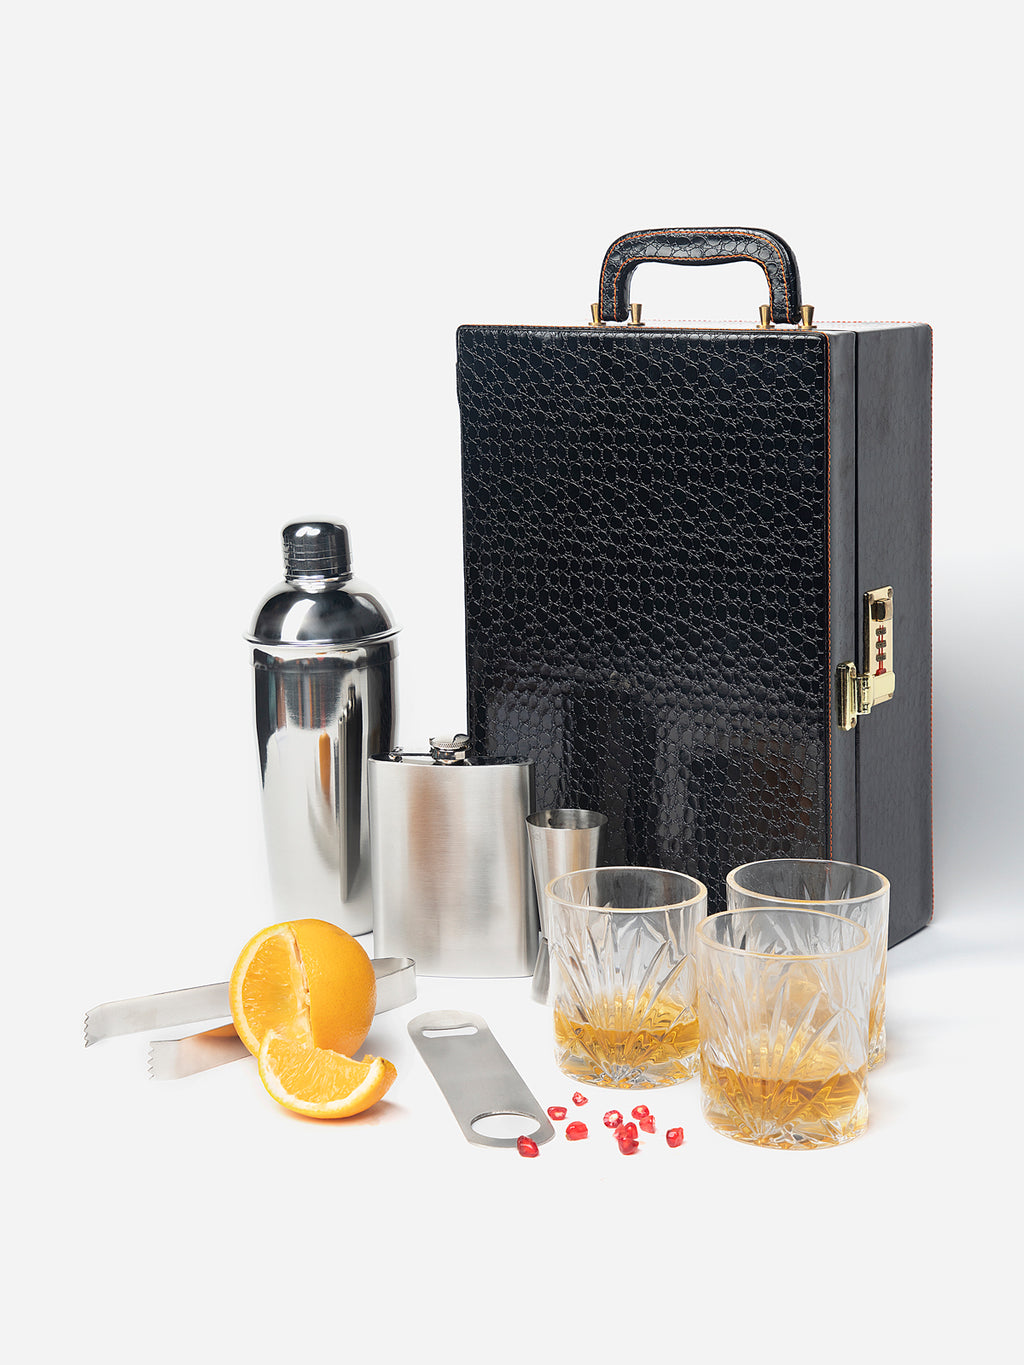 Anything & Everything Croc Print 3 Whisky Glasses Bar Set | Premium Bar Set with Bar Accessories for Home, Travel & Outdoors (Black)